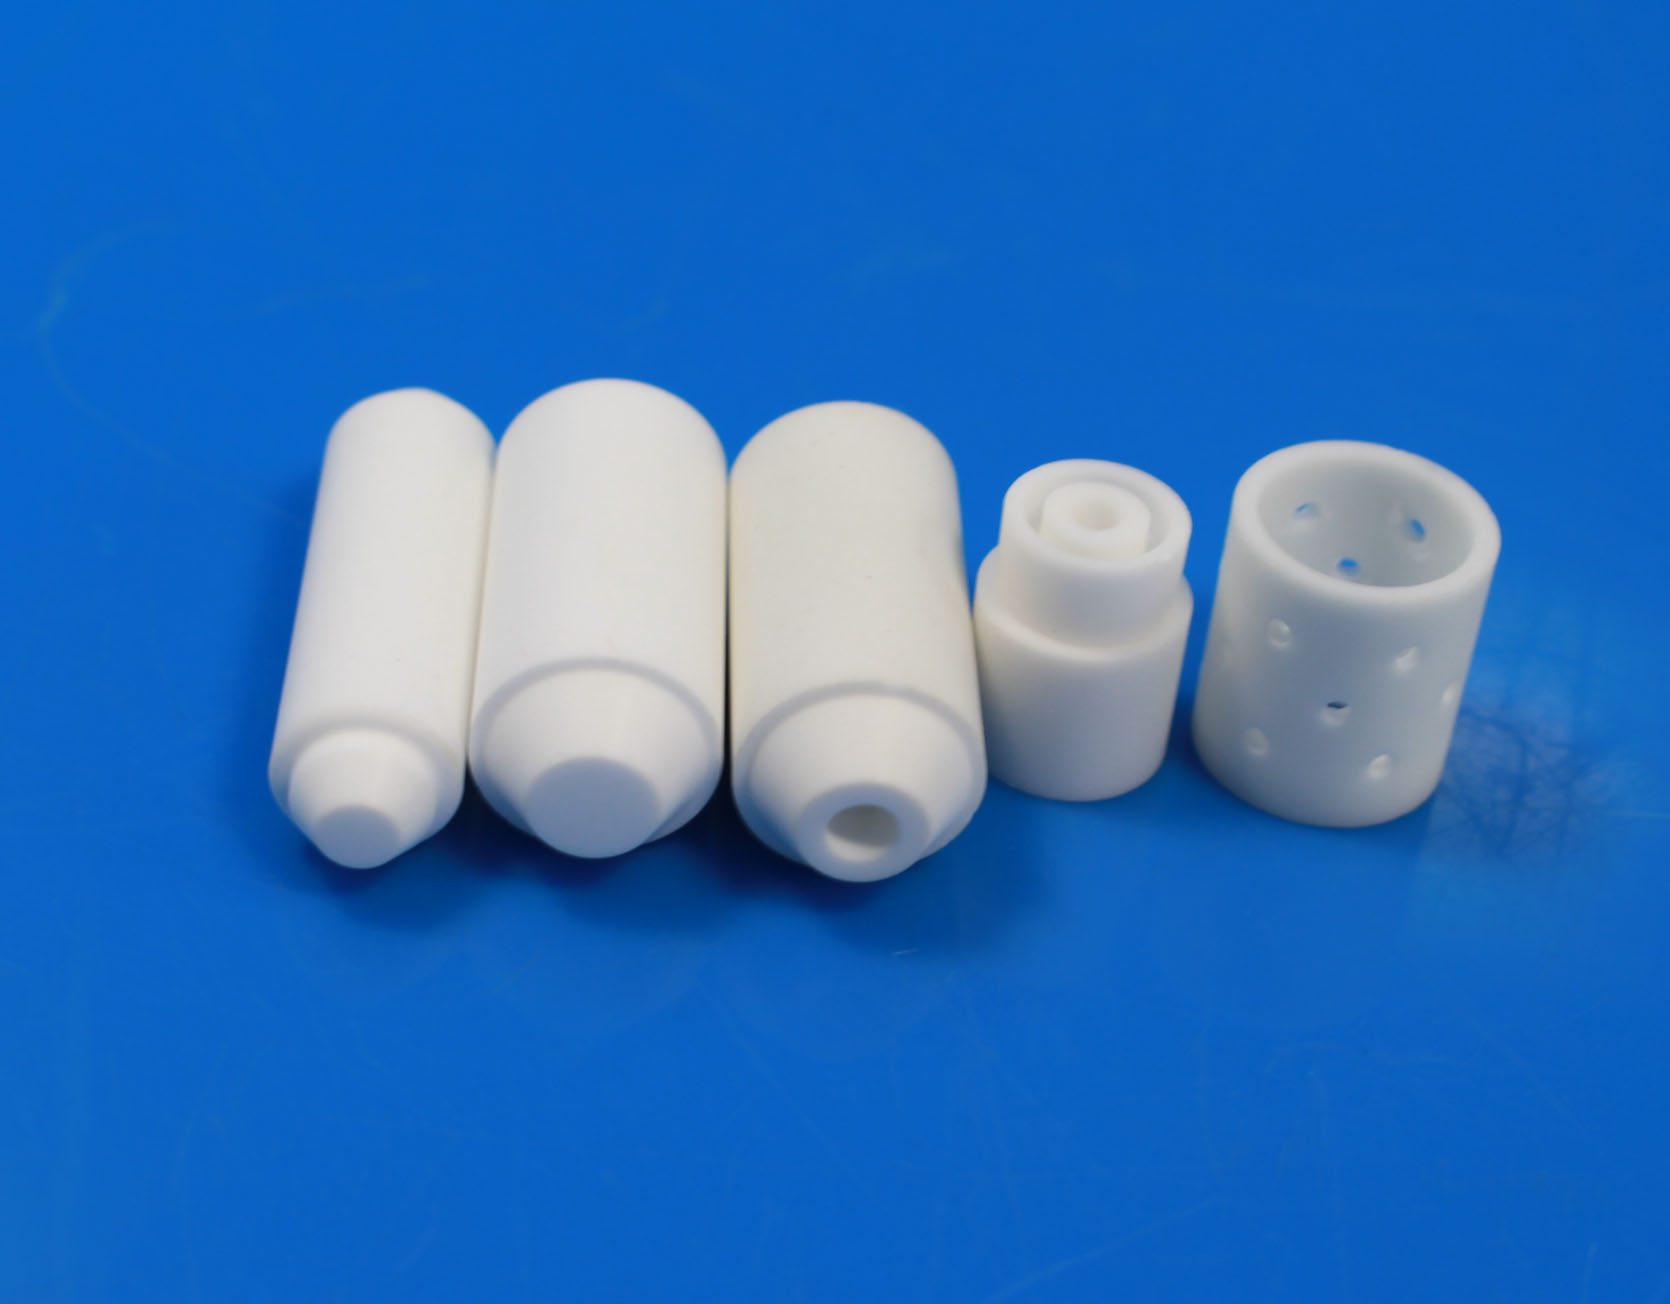 Beryllia Ceramic Part For Microwave Communication Systems And Microwave Ovens